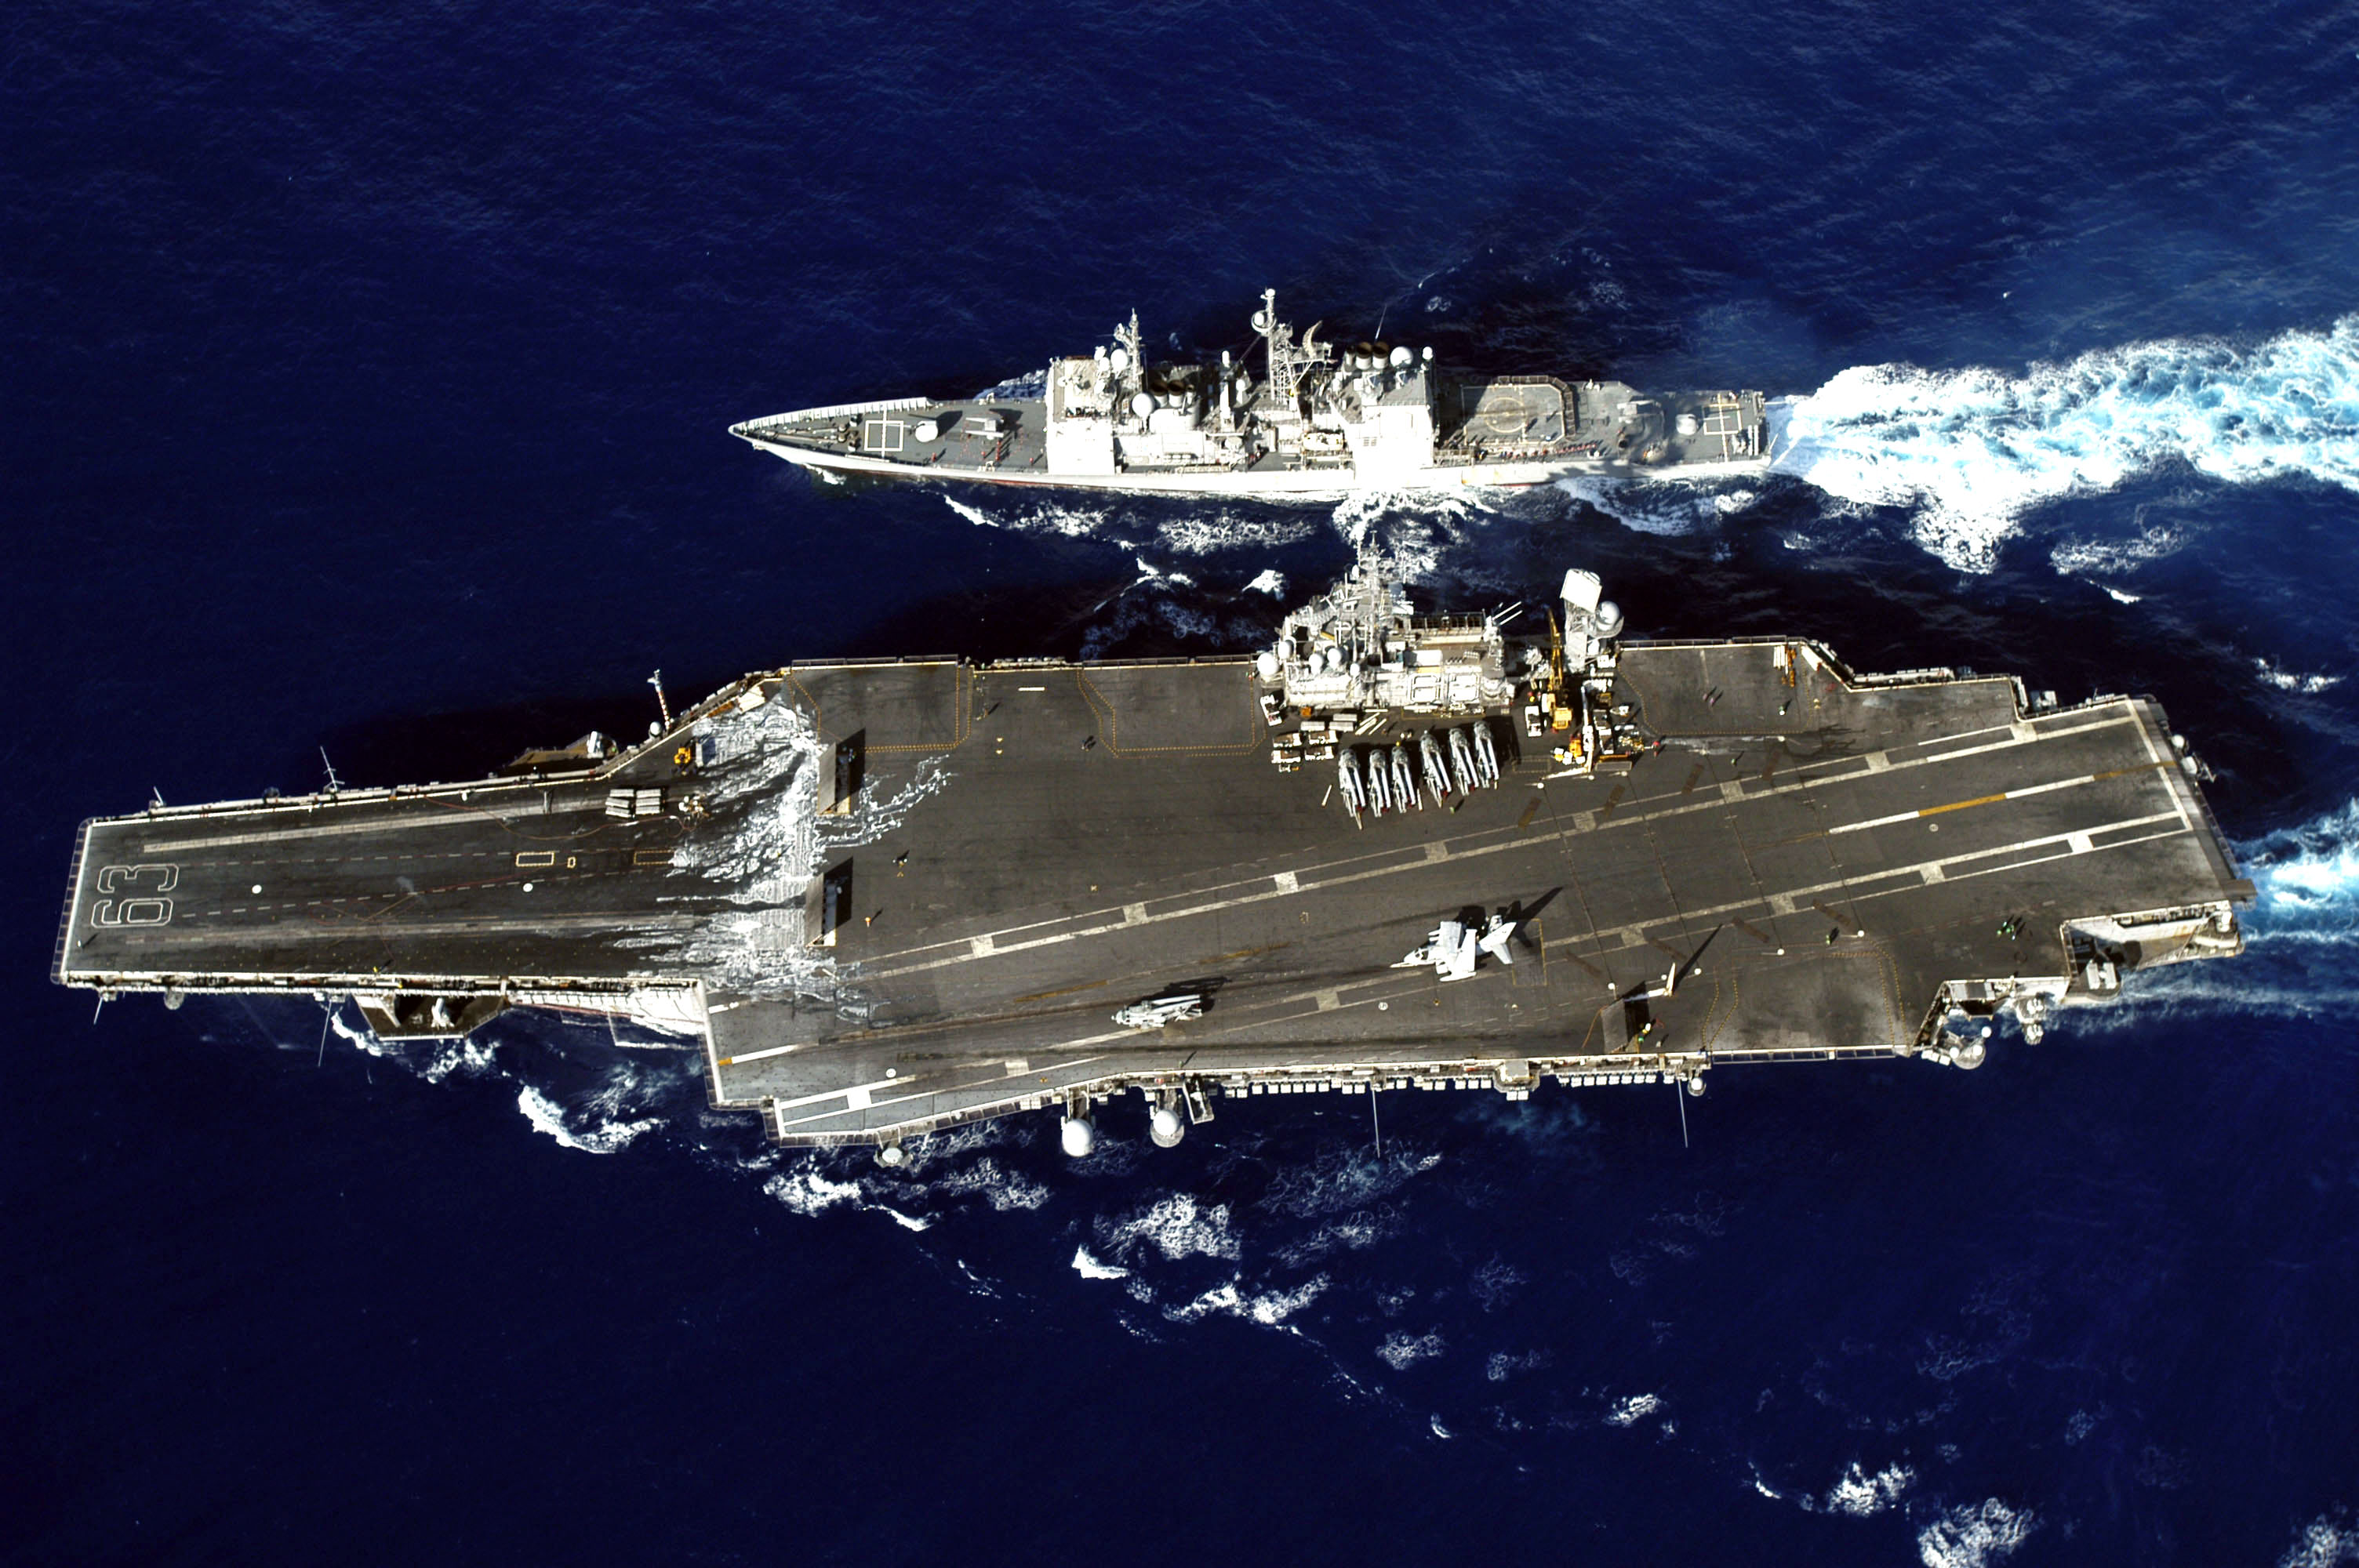 US Navy 040904-N-0120R-037 The Ticonderoga-class cruiser USS Vincennes (CG 49) and the conventionally powered aircraft carrier USS Kitty Hawk (CV 63) perform a replenishment at sea (RAS)